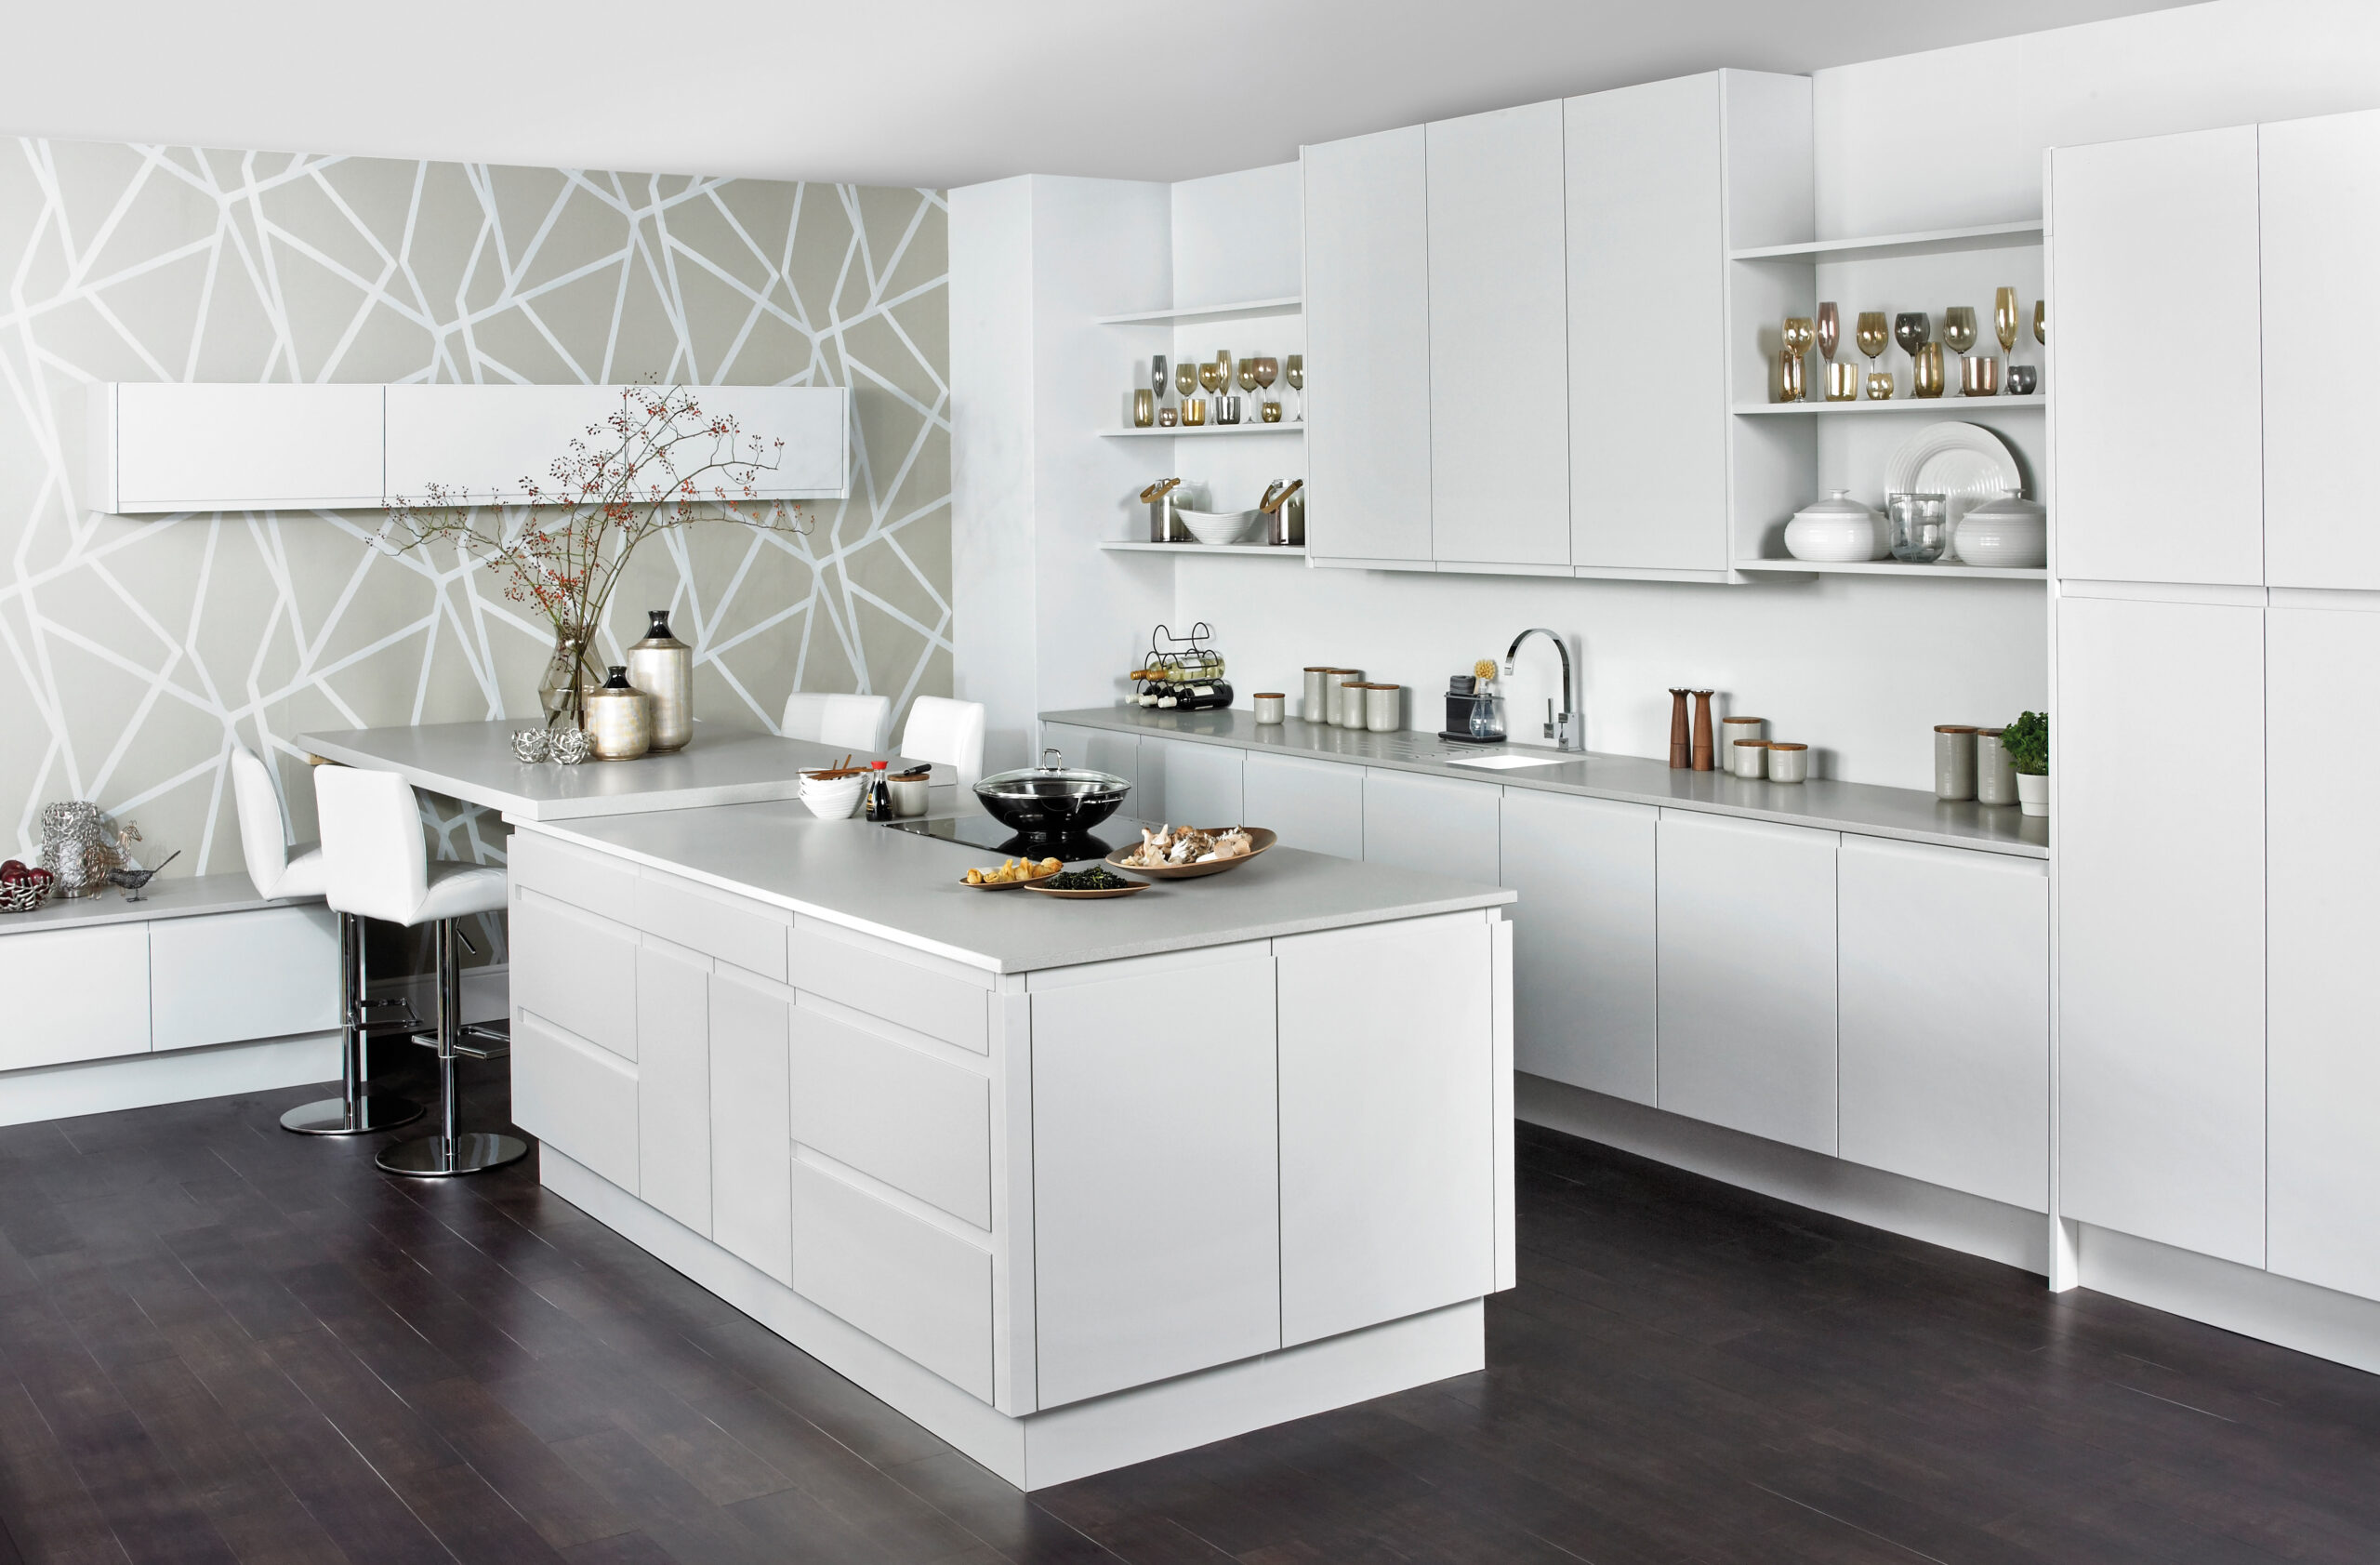 white kitchen island design with grey worktops , base and wall cabinets to rear with sink and hob